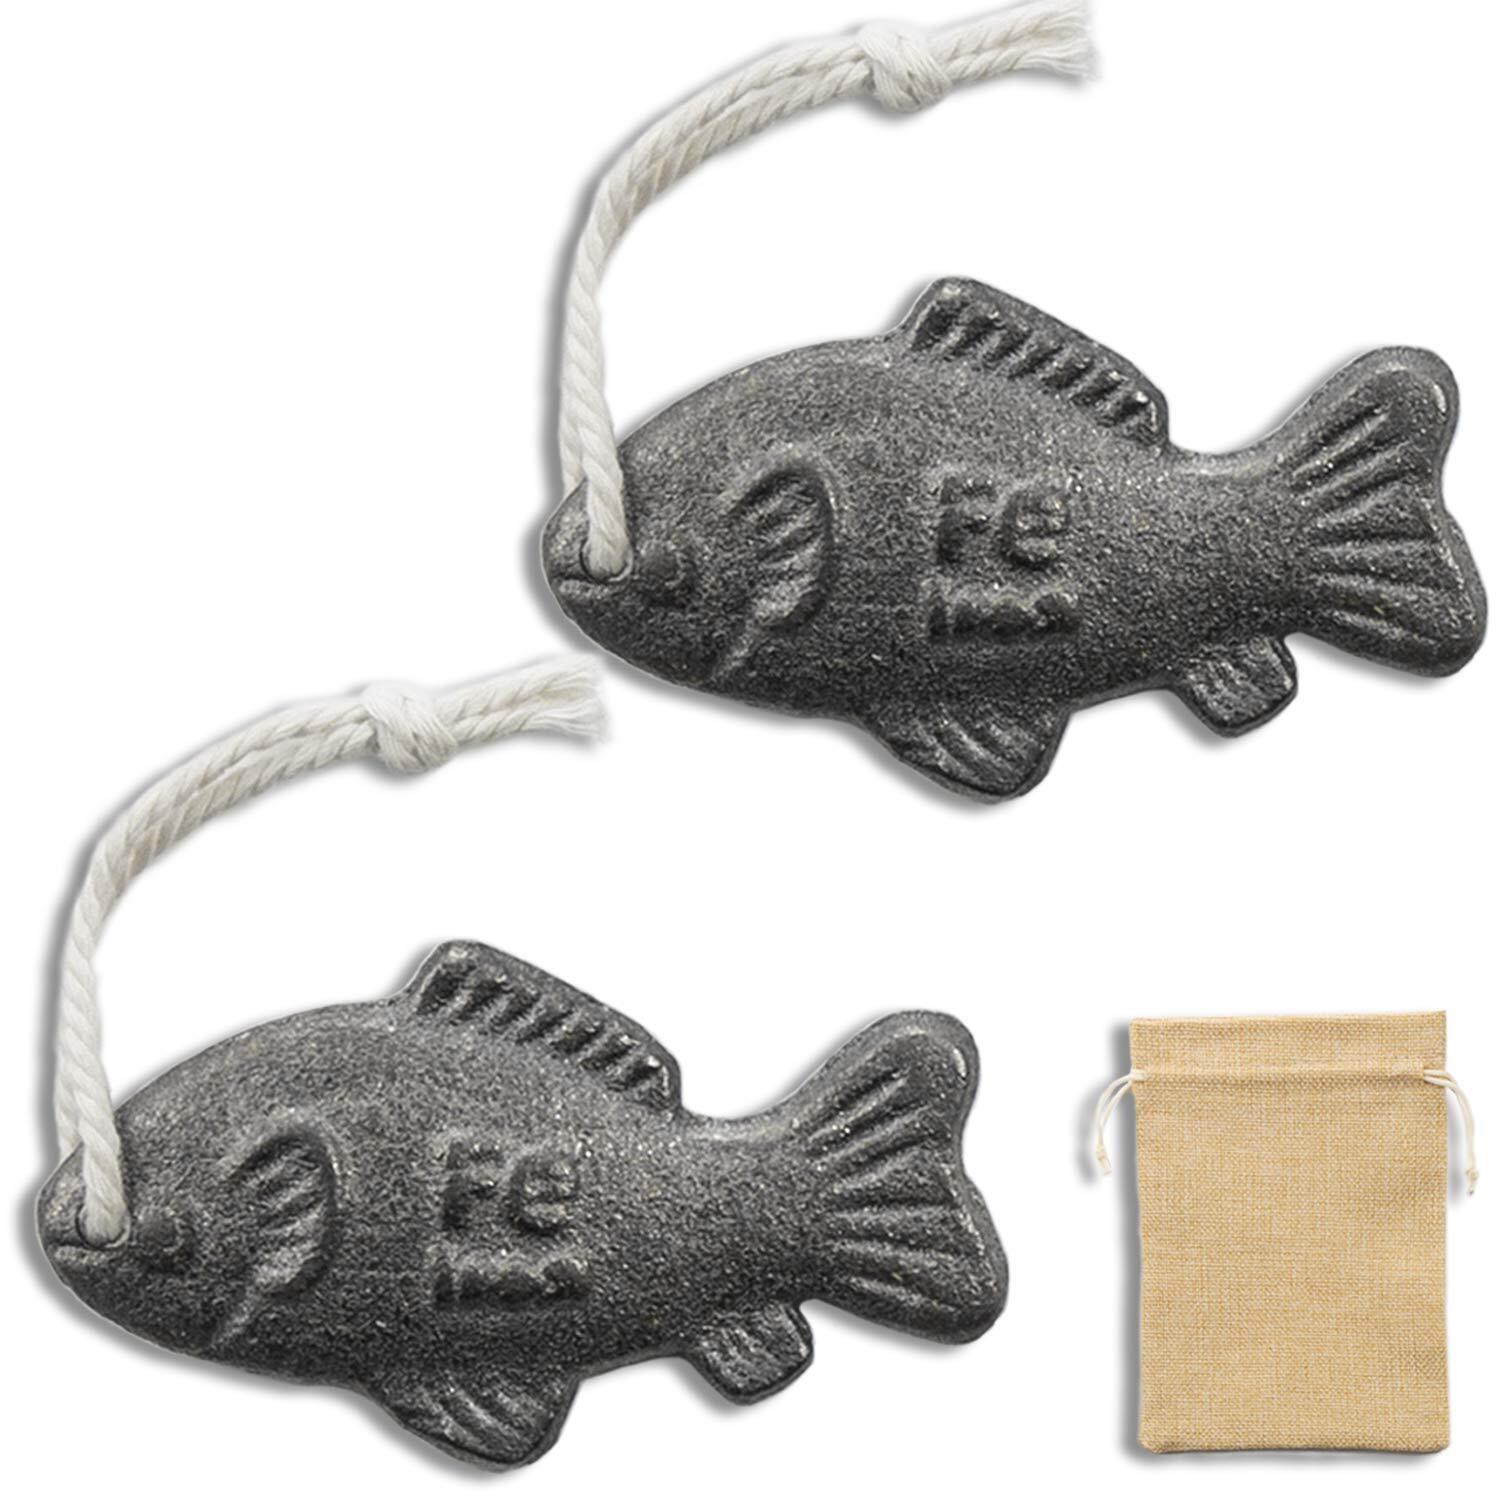 YOUIN 2 Packs of Iron Fish with Bag-A Natural Source of Iron to Reduce the Risk